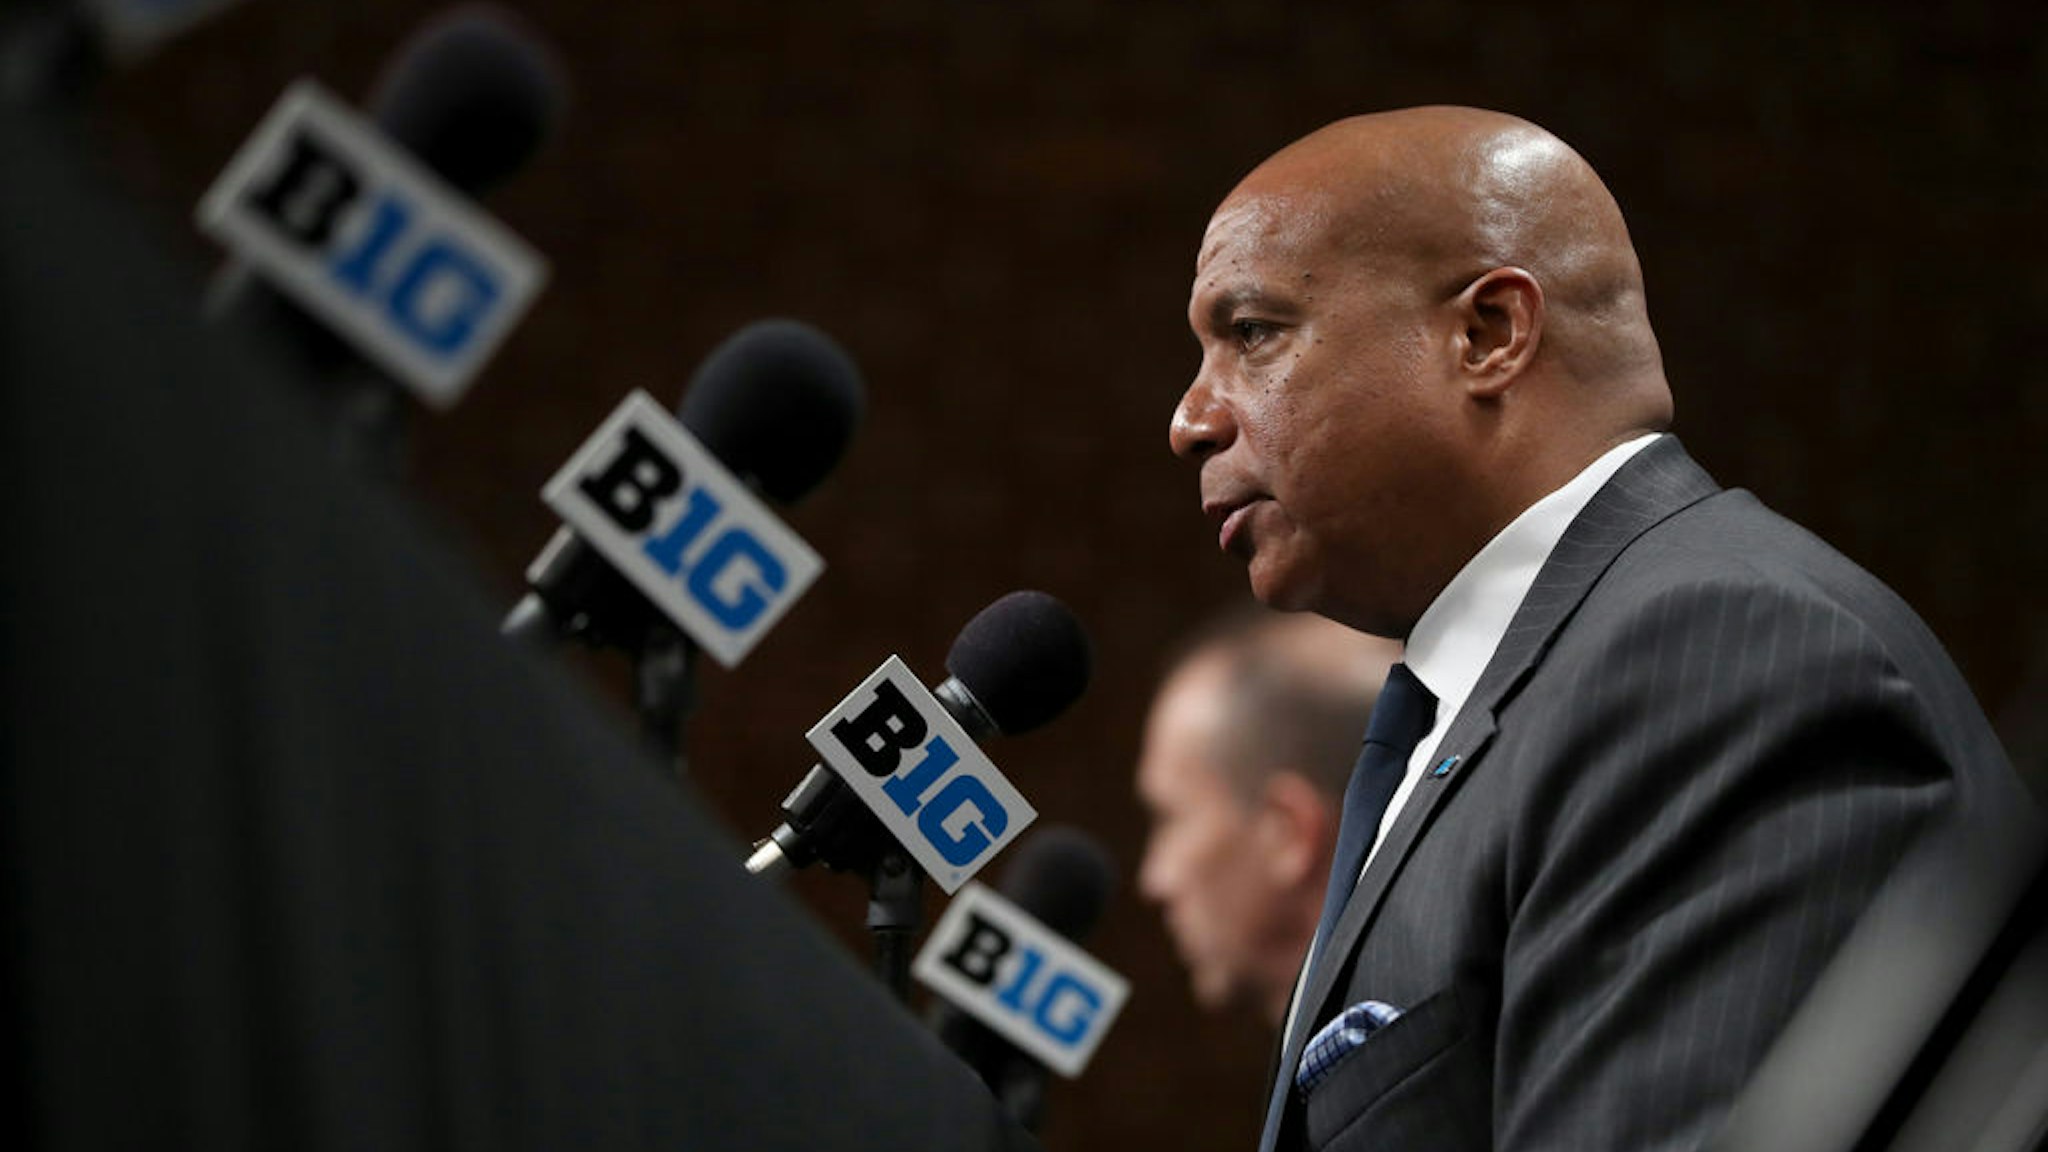 Big Ten commissioner Kevin Warren speaks about the cancellation of the men's Big 10 basketball tournament at Bankers Life Fieldhouse in Indianapolis on March 12, 2020. (Chris Sweda/Chicago Tribune/Tribune News Service via Getty Images)